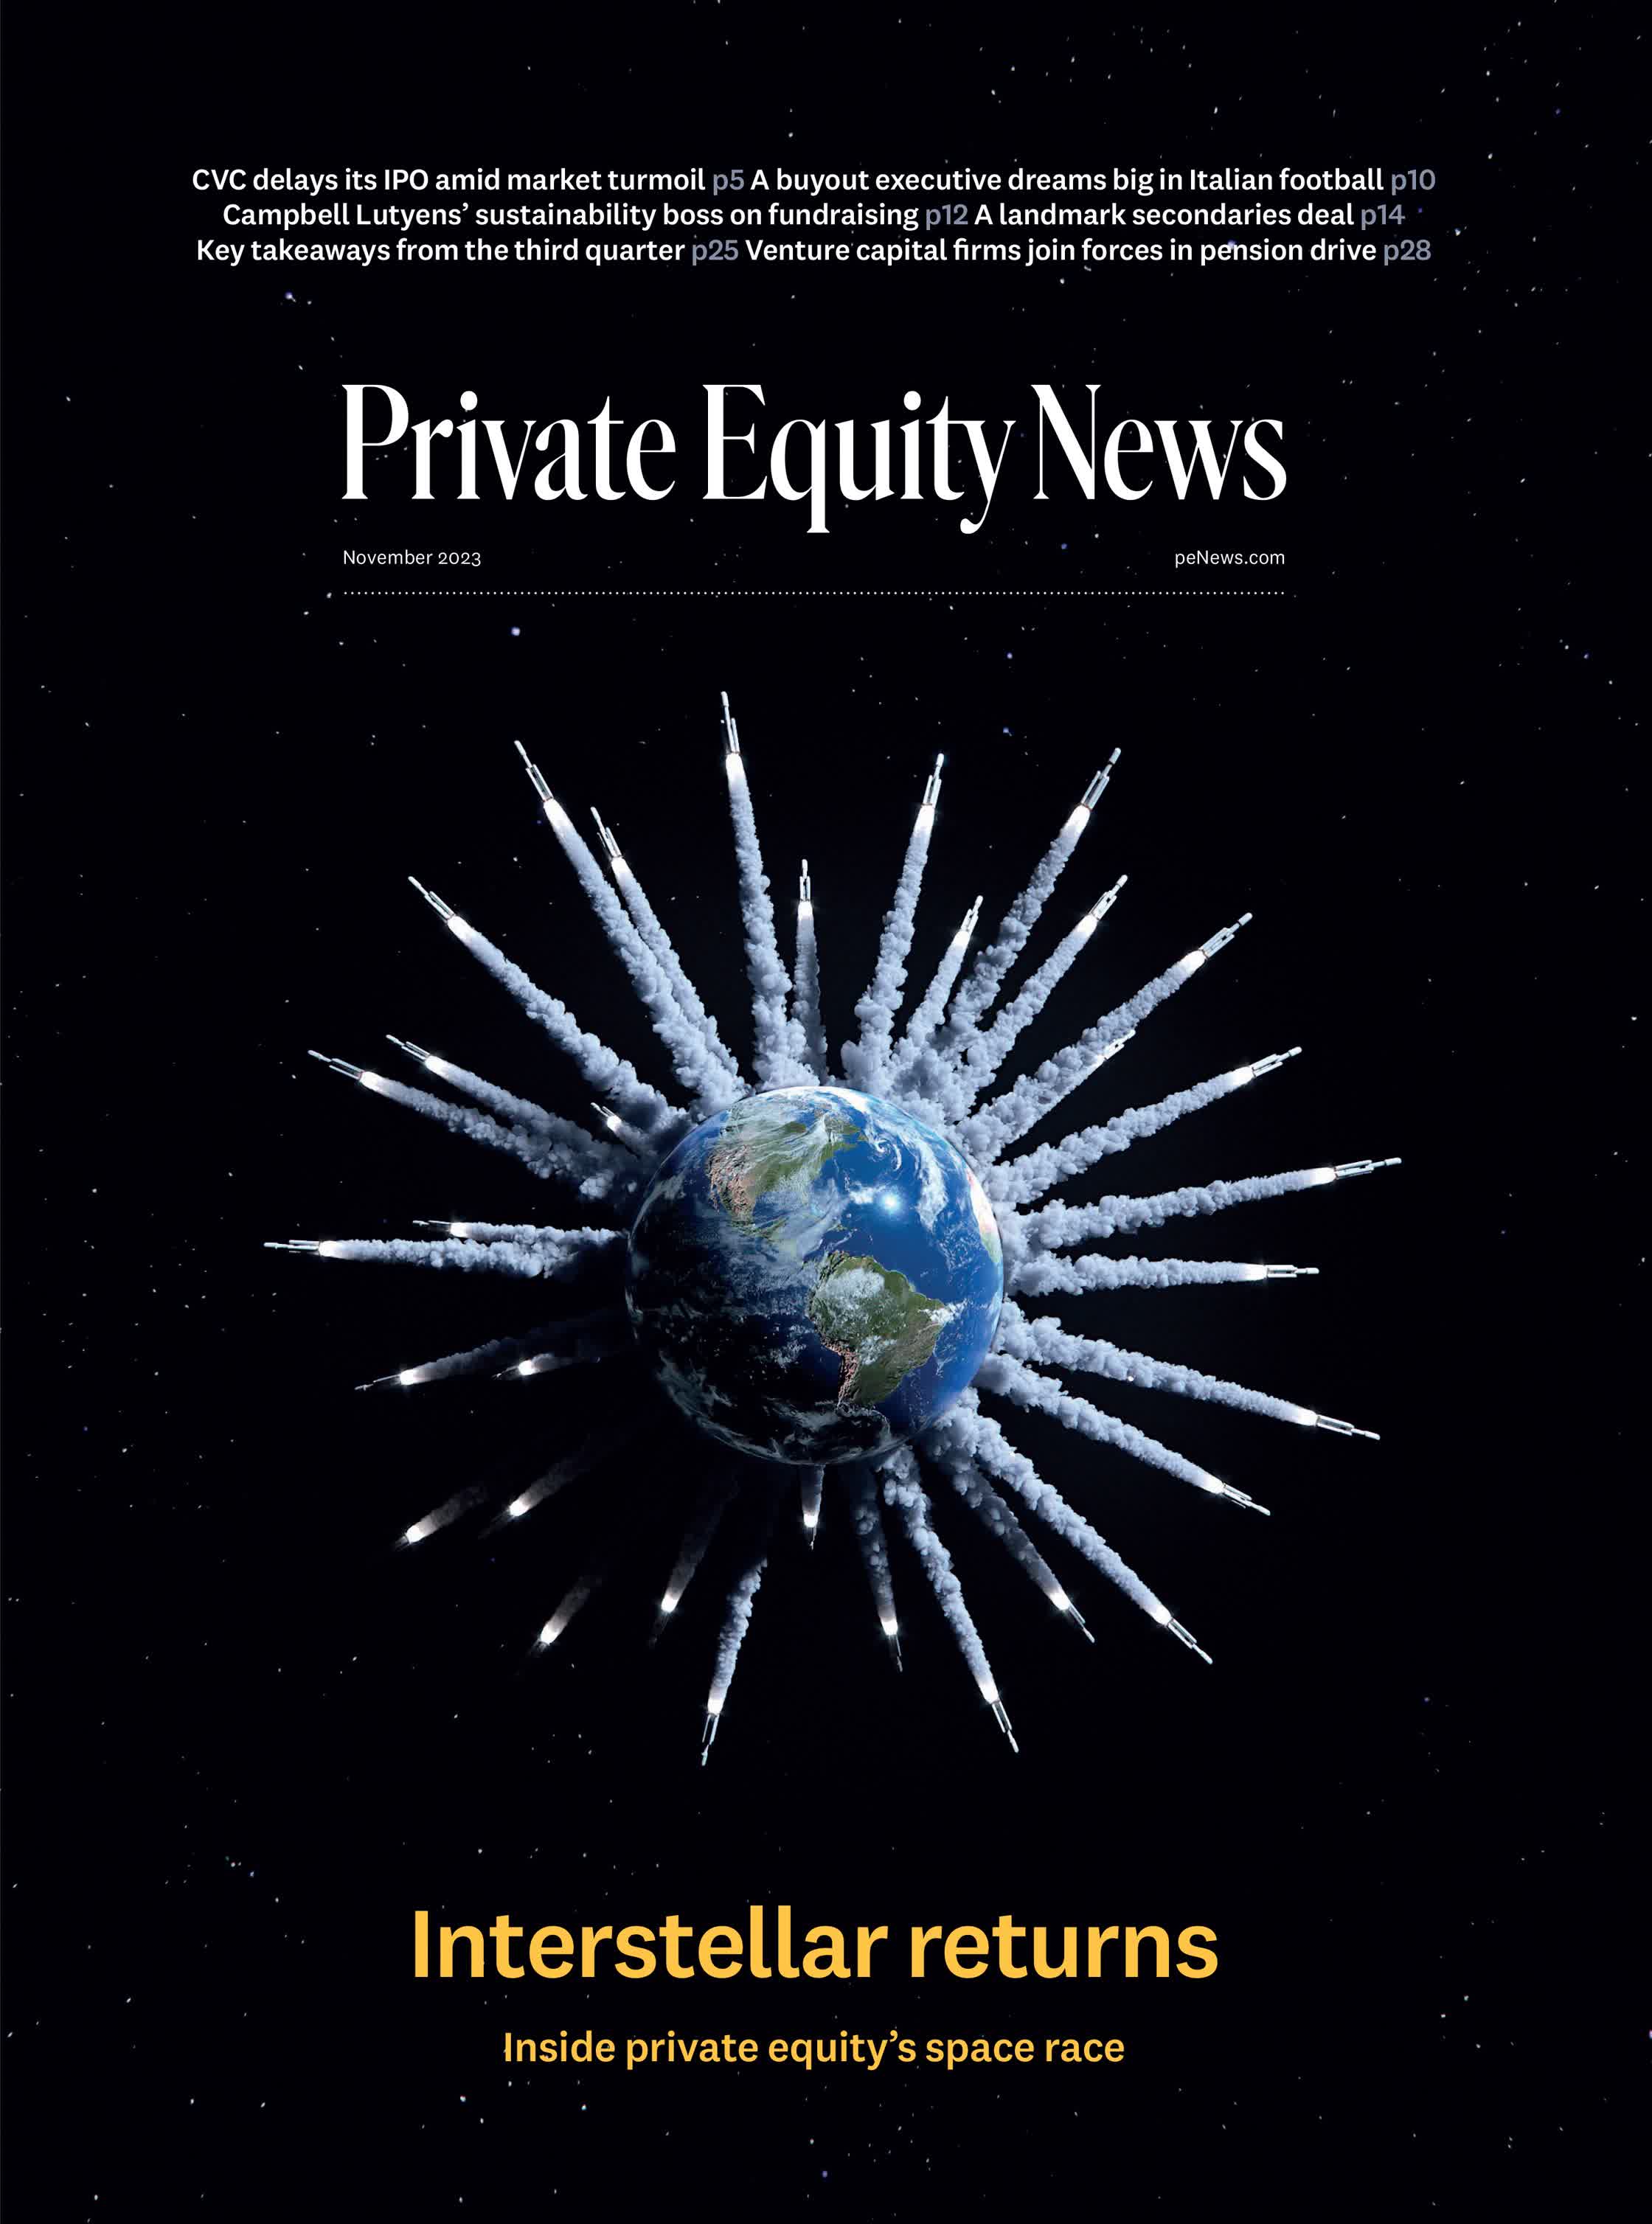 pcrowther comm by Dow Jones for Private Equity News.jpg